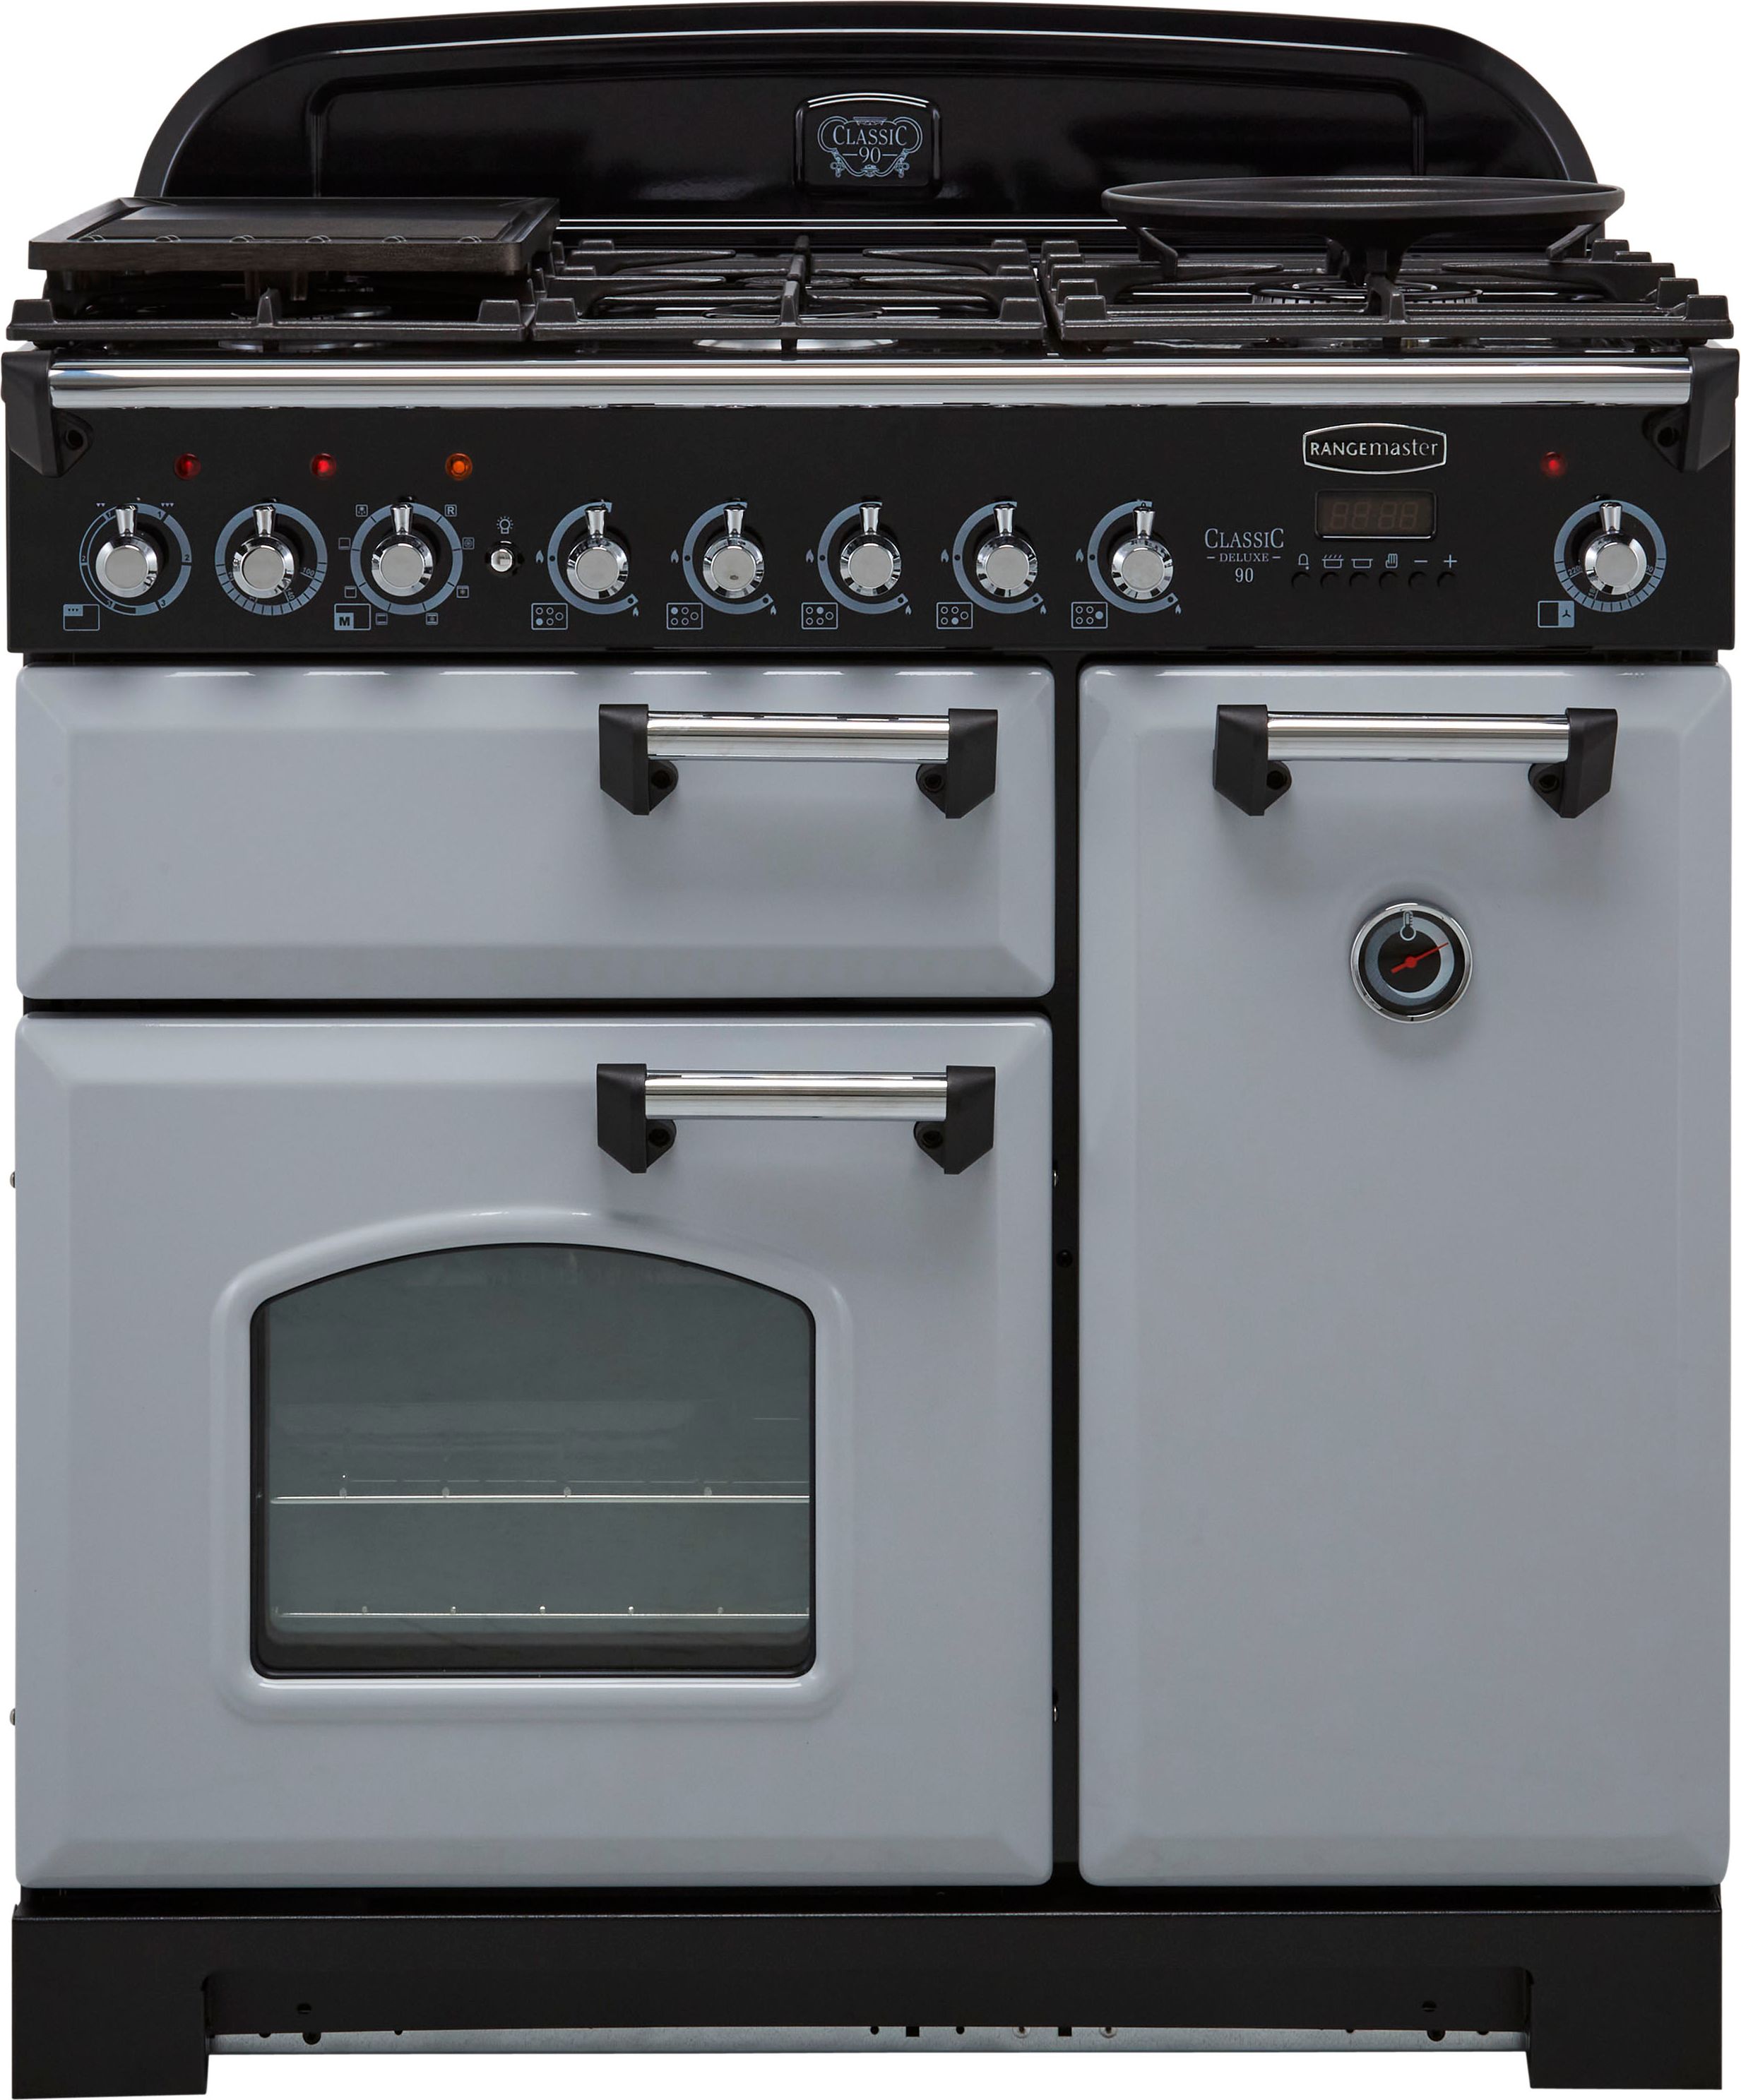 Rangemaster Classic Deluxe CDL90DFFRP/C 90cm Dual Fuel Range Cooker - Royal Pearl / Chrome - A/A Rated, Grey